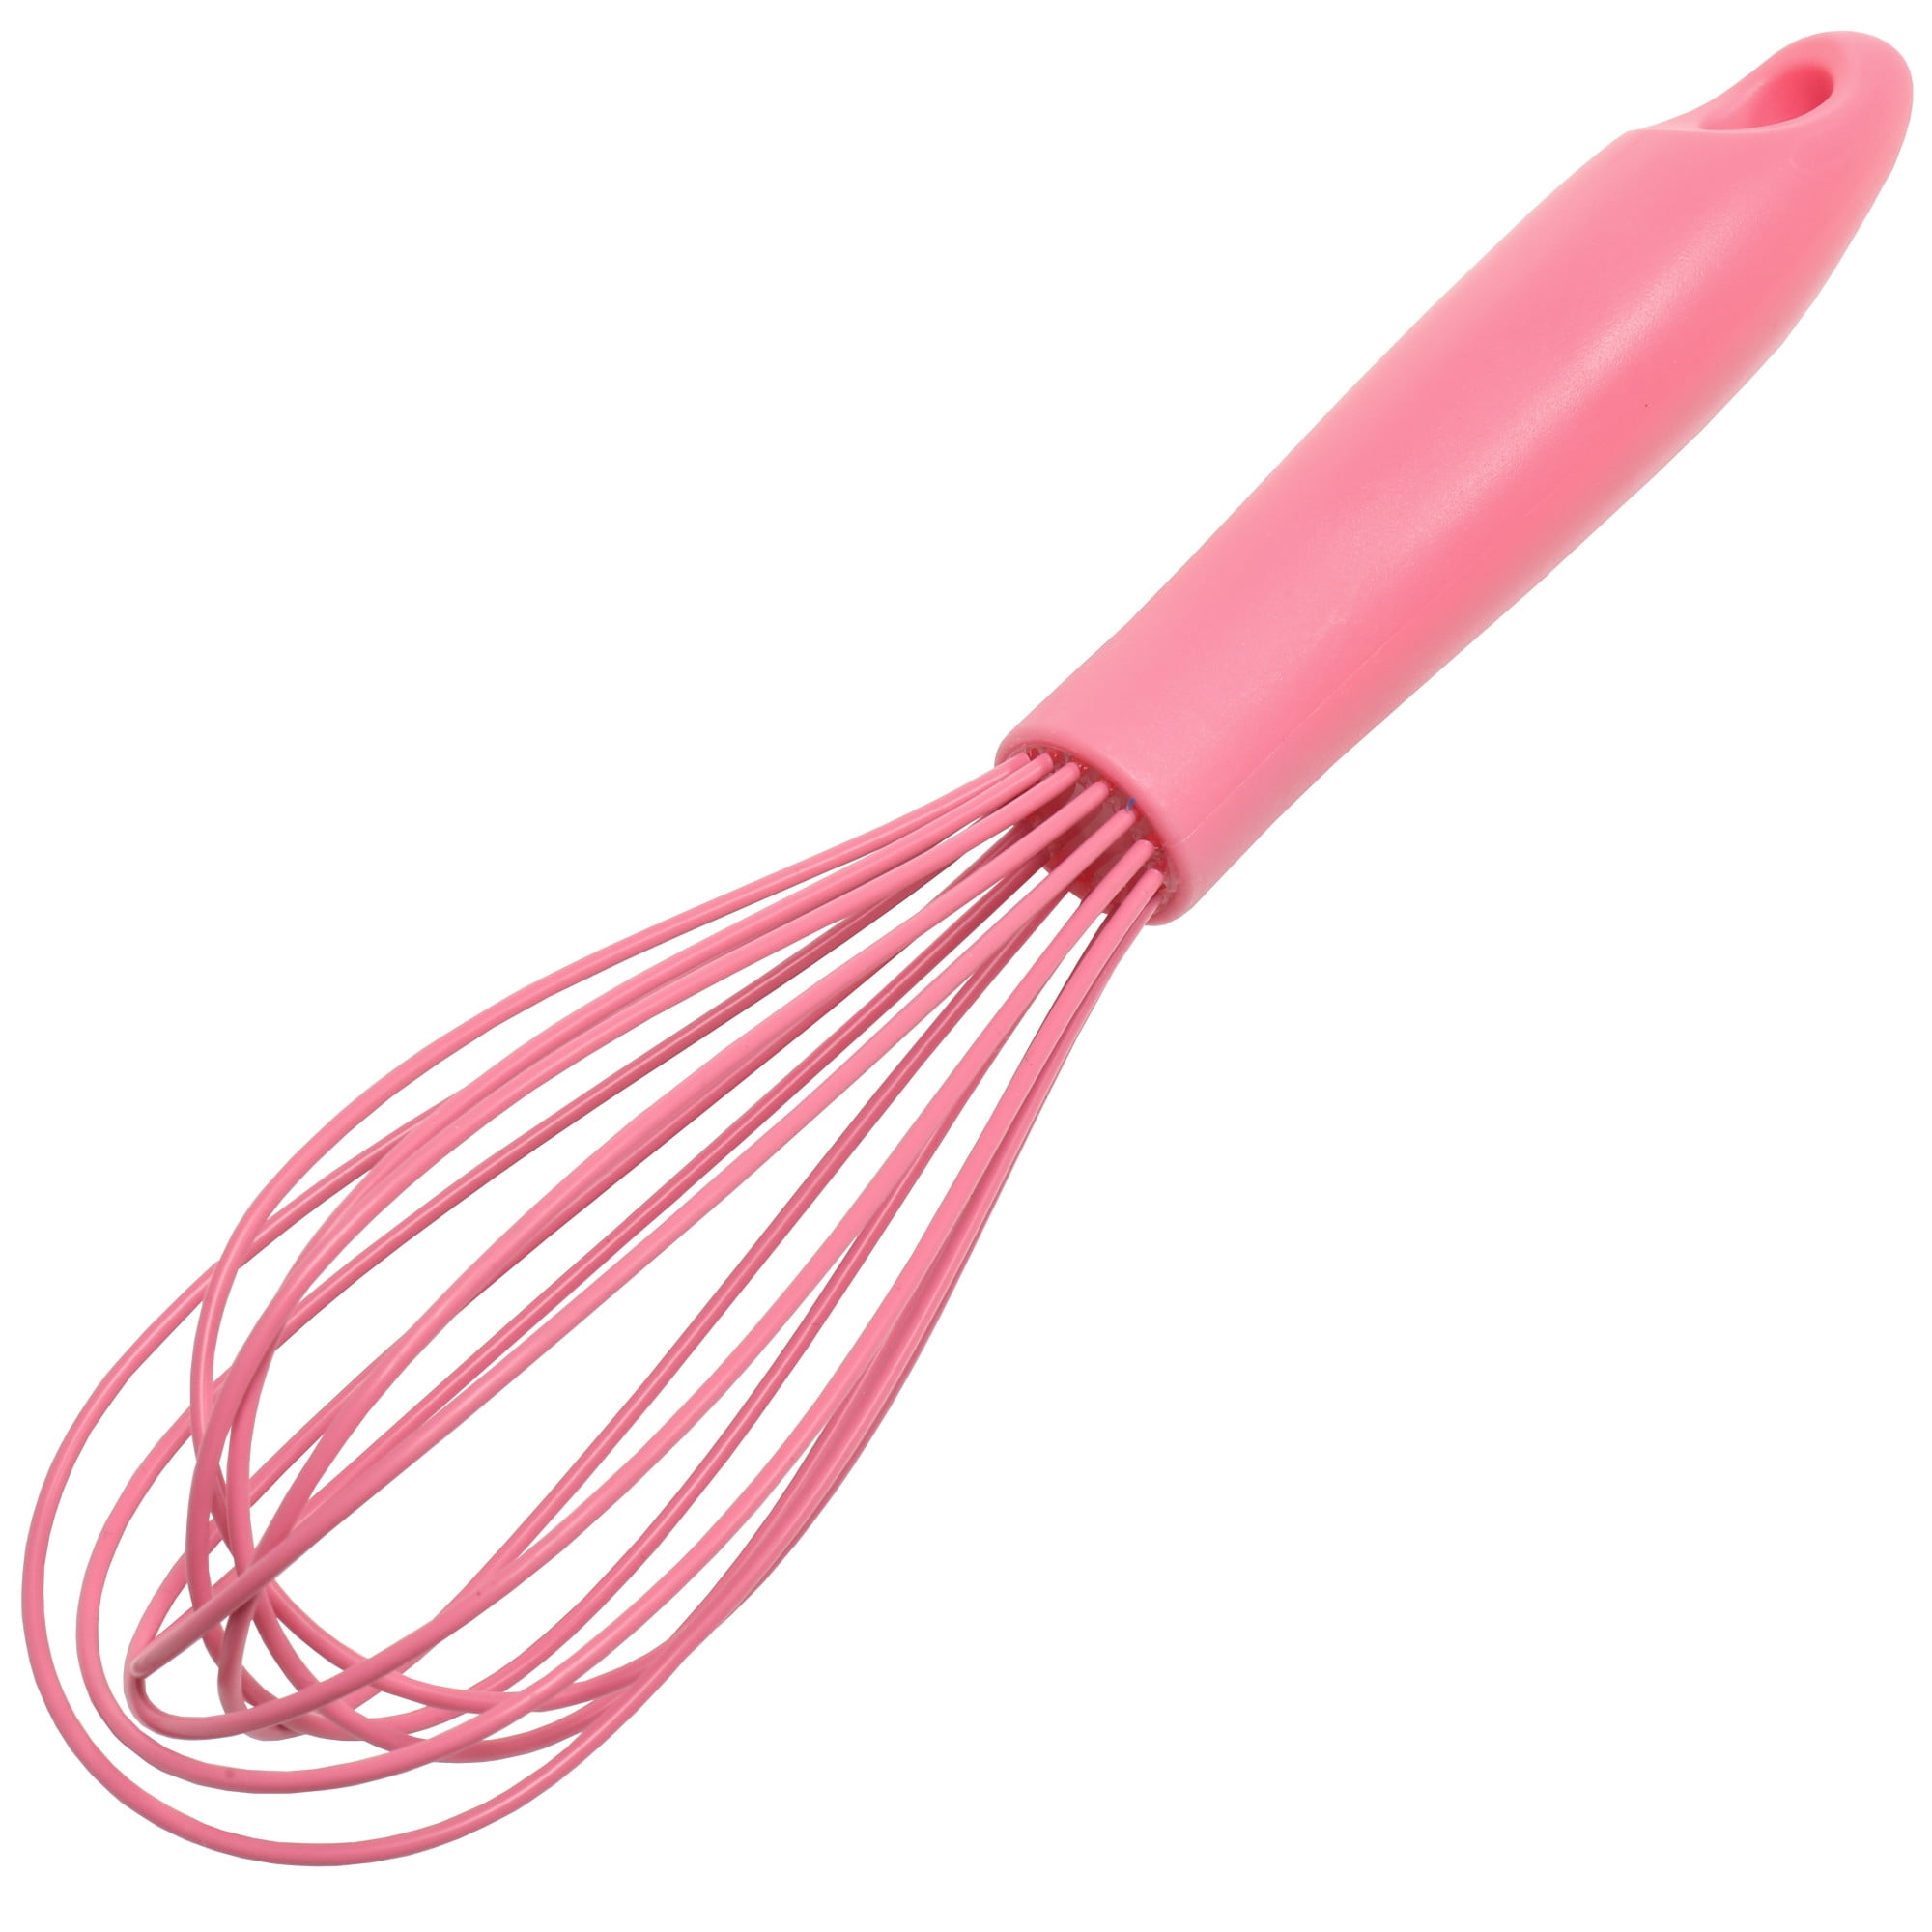 Oxo Silicone Whisk - Black/red : Target